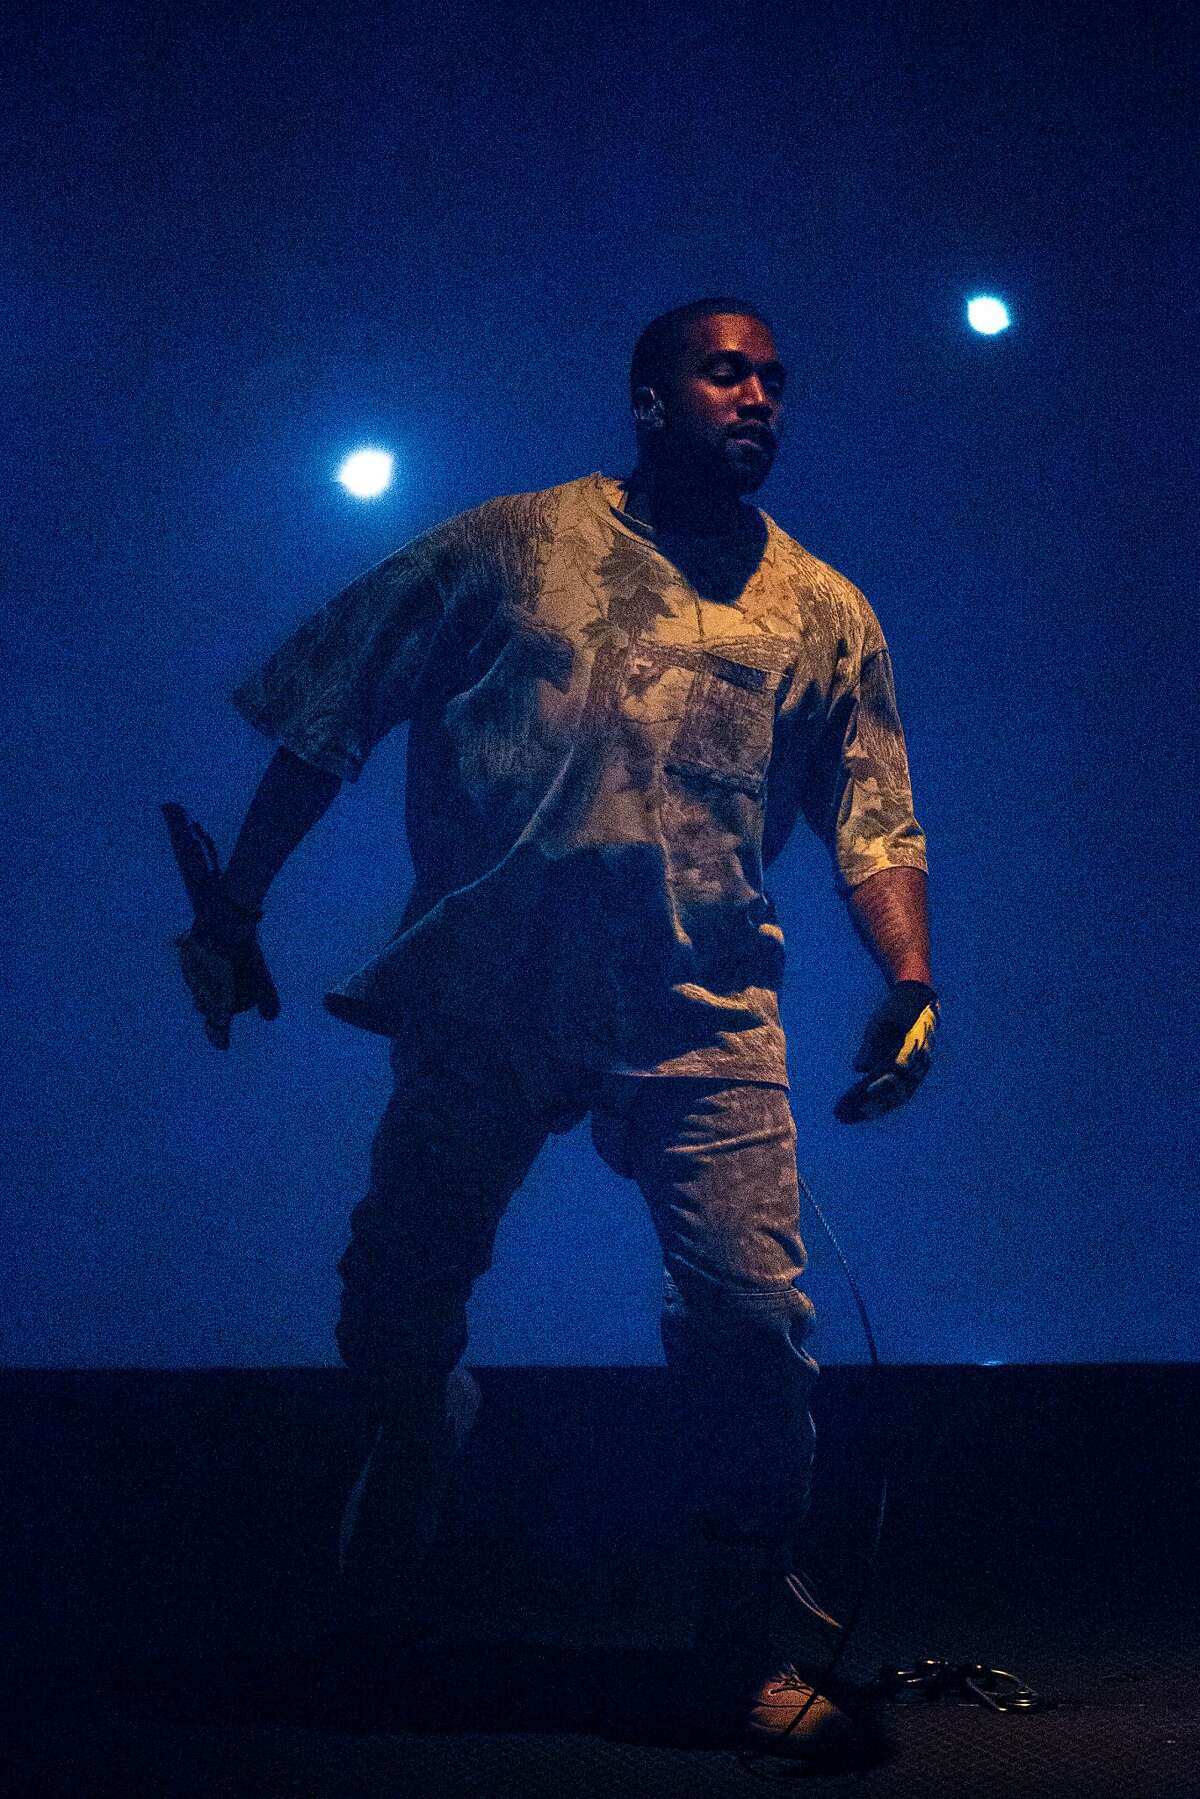 Kanye West performs during his Saint Pablo Tour at the Oracle Arena on Saturday, Oct. 22, 2016 in Oakland, Calif.